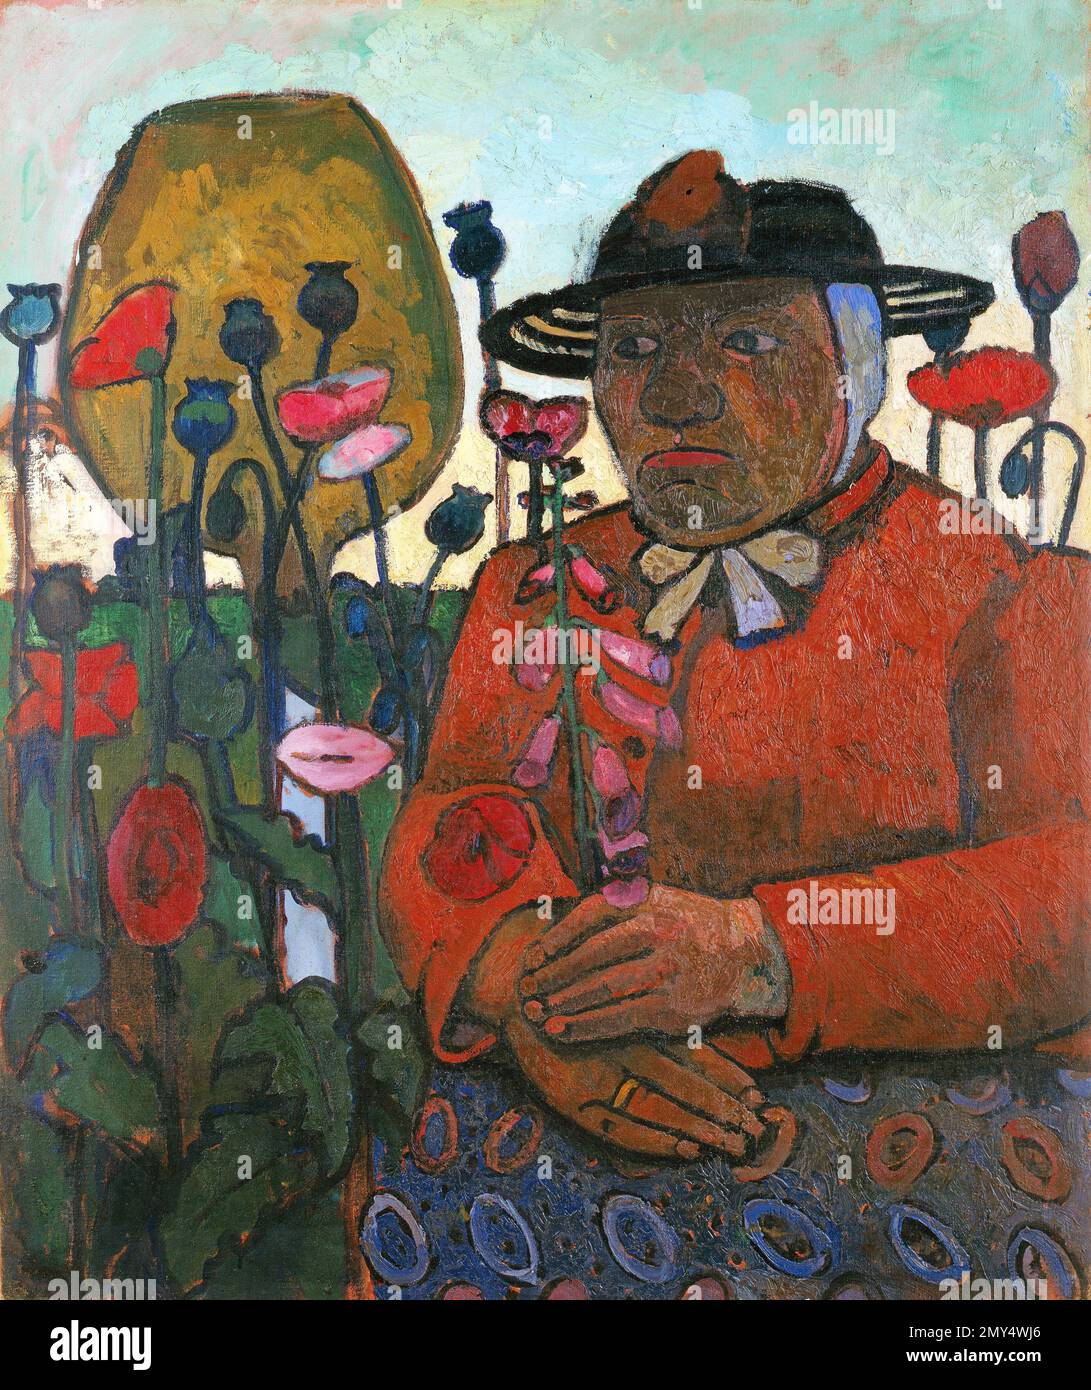 Paula Modersohn-Becker. Painting entitled 'Old Woman from Almshouse with Glass Ball and Poppy Flowers' by the German Expressionist painter, Paula Modersohn-Becker (1876-1907), 1907 Stock Photo